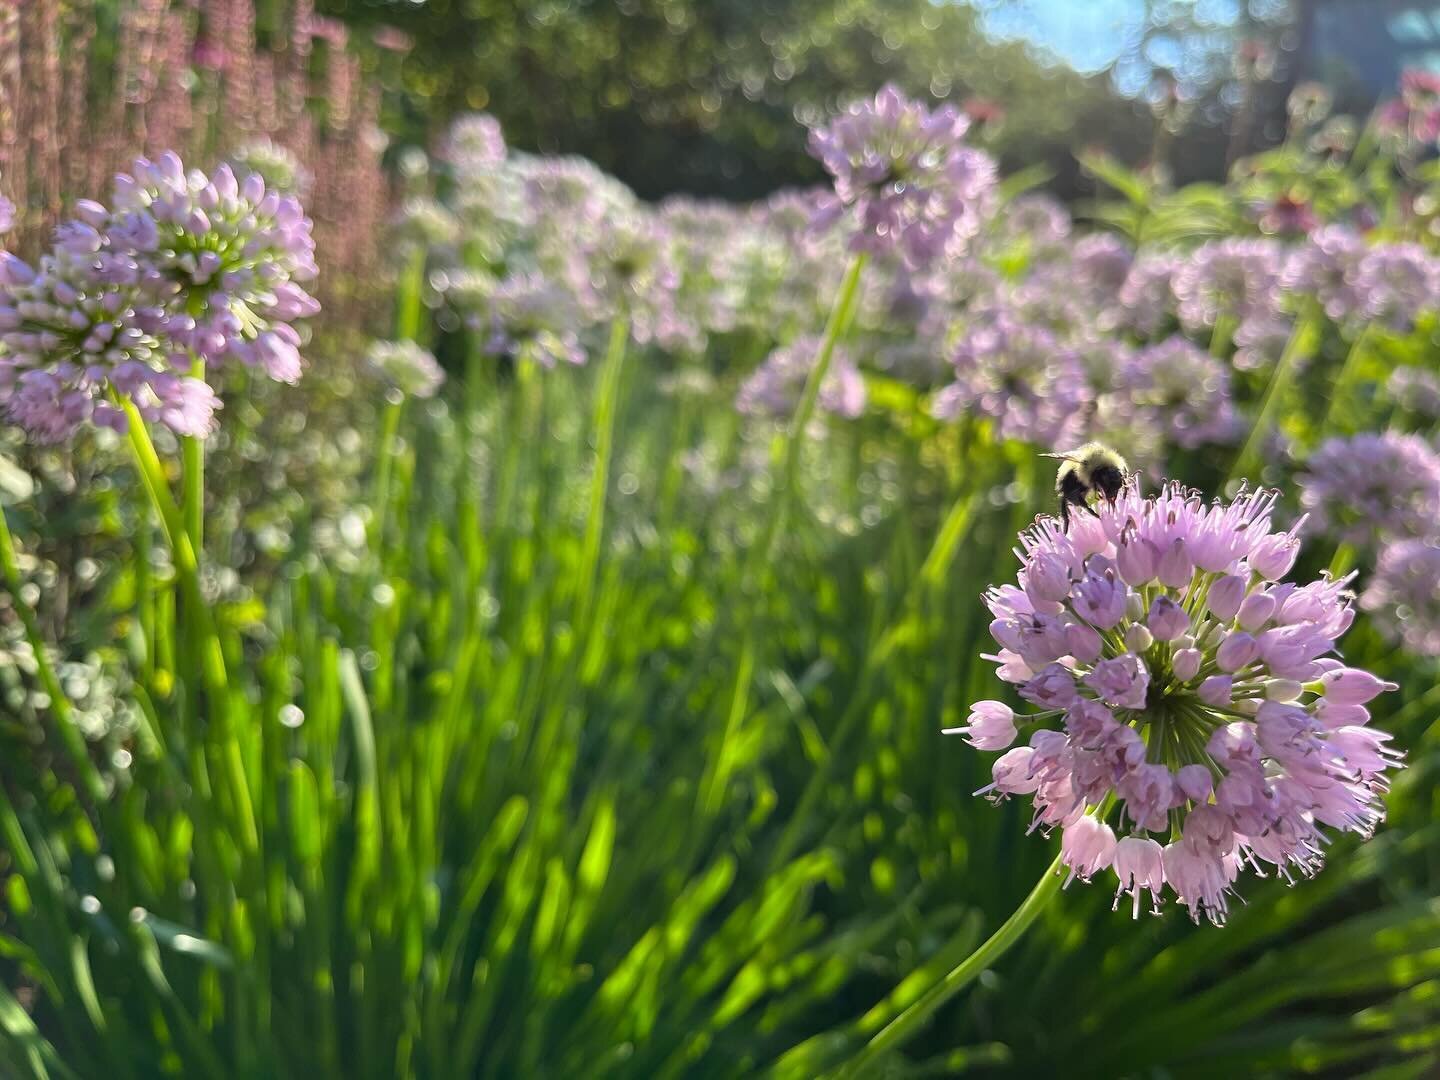 29 Days of Perennial Favorites: 

For each day of February I&rsquo;ll put a spotlight on a hard-working, reliable perennial from the garden. 

Day 16: Allium &lsquo;Summer Beauty&rsquo;&rsquo; (Ornamental Onion)

Anyone who&rsquo;s worked with me or 